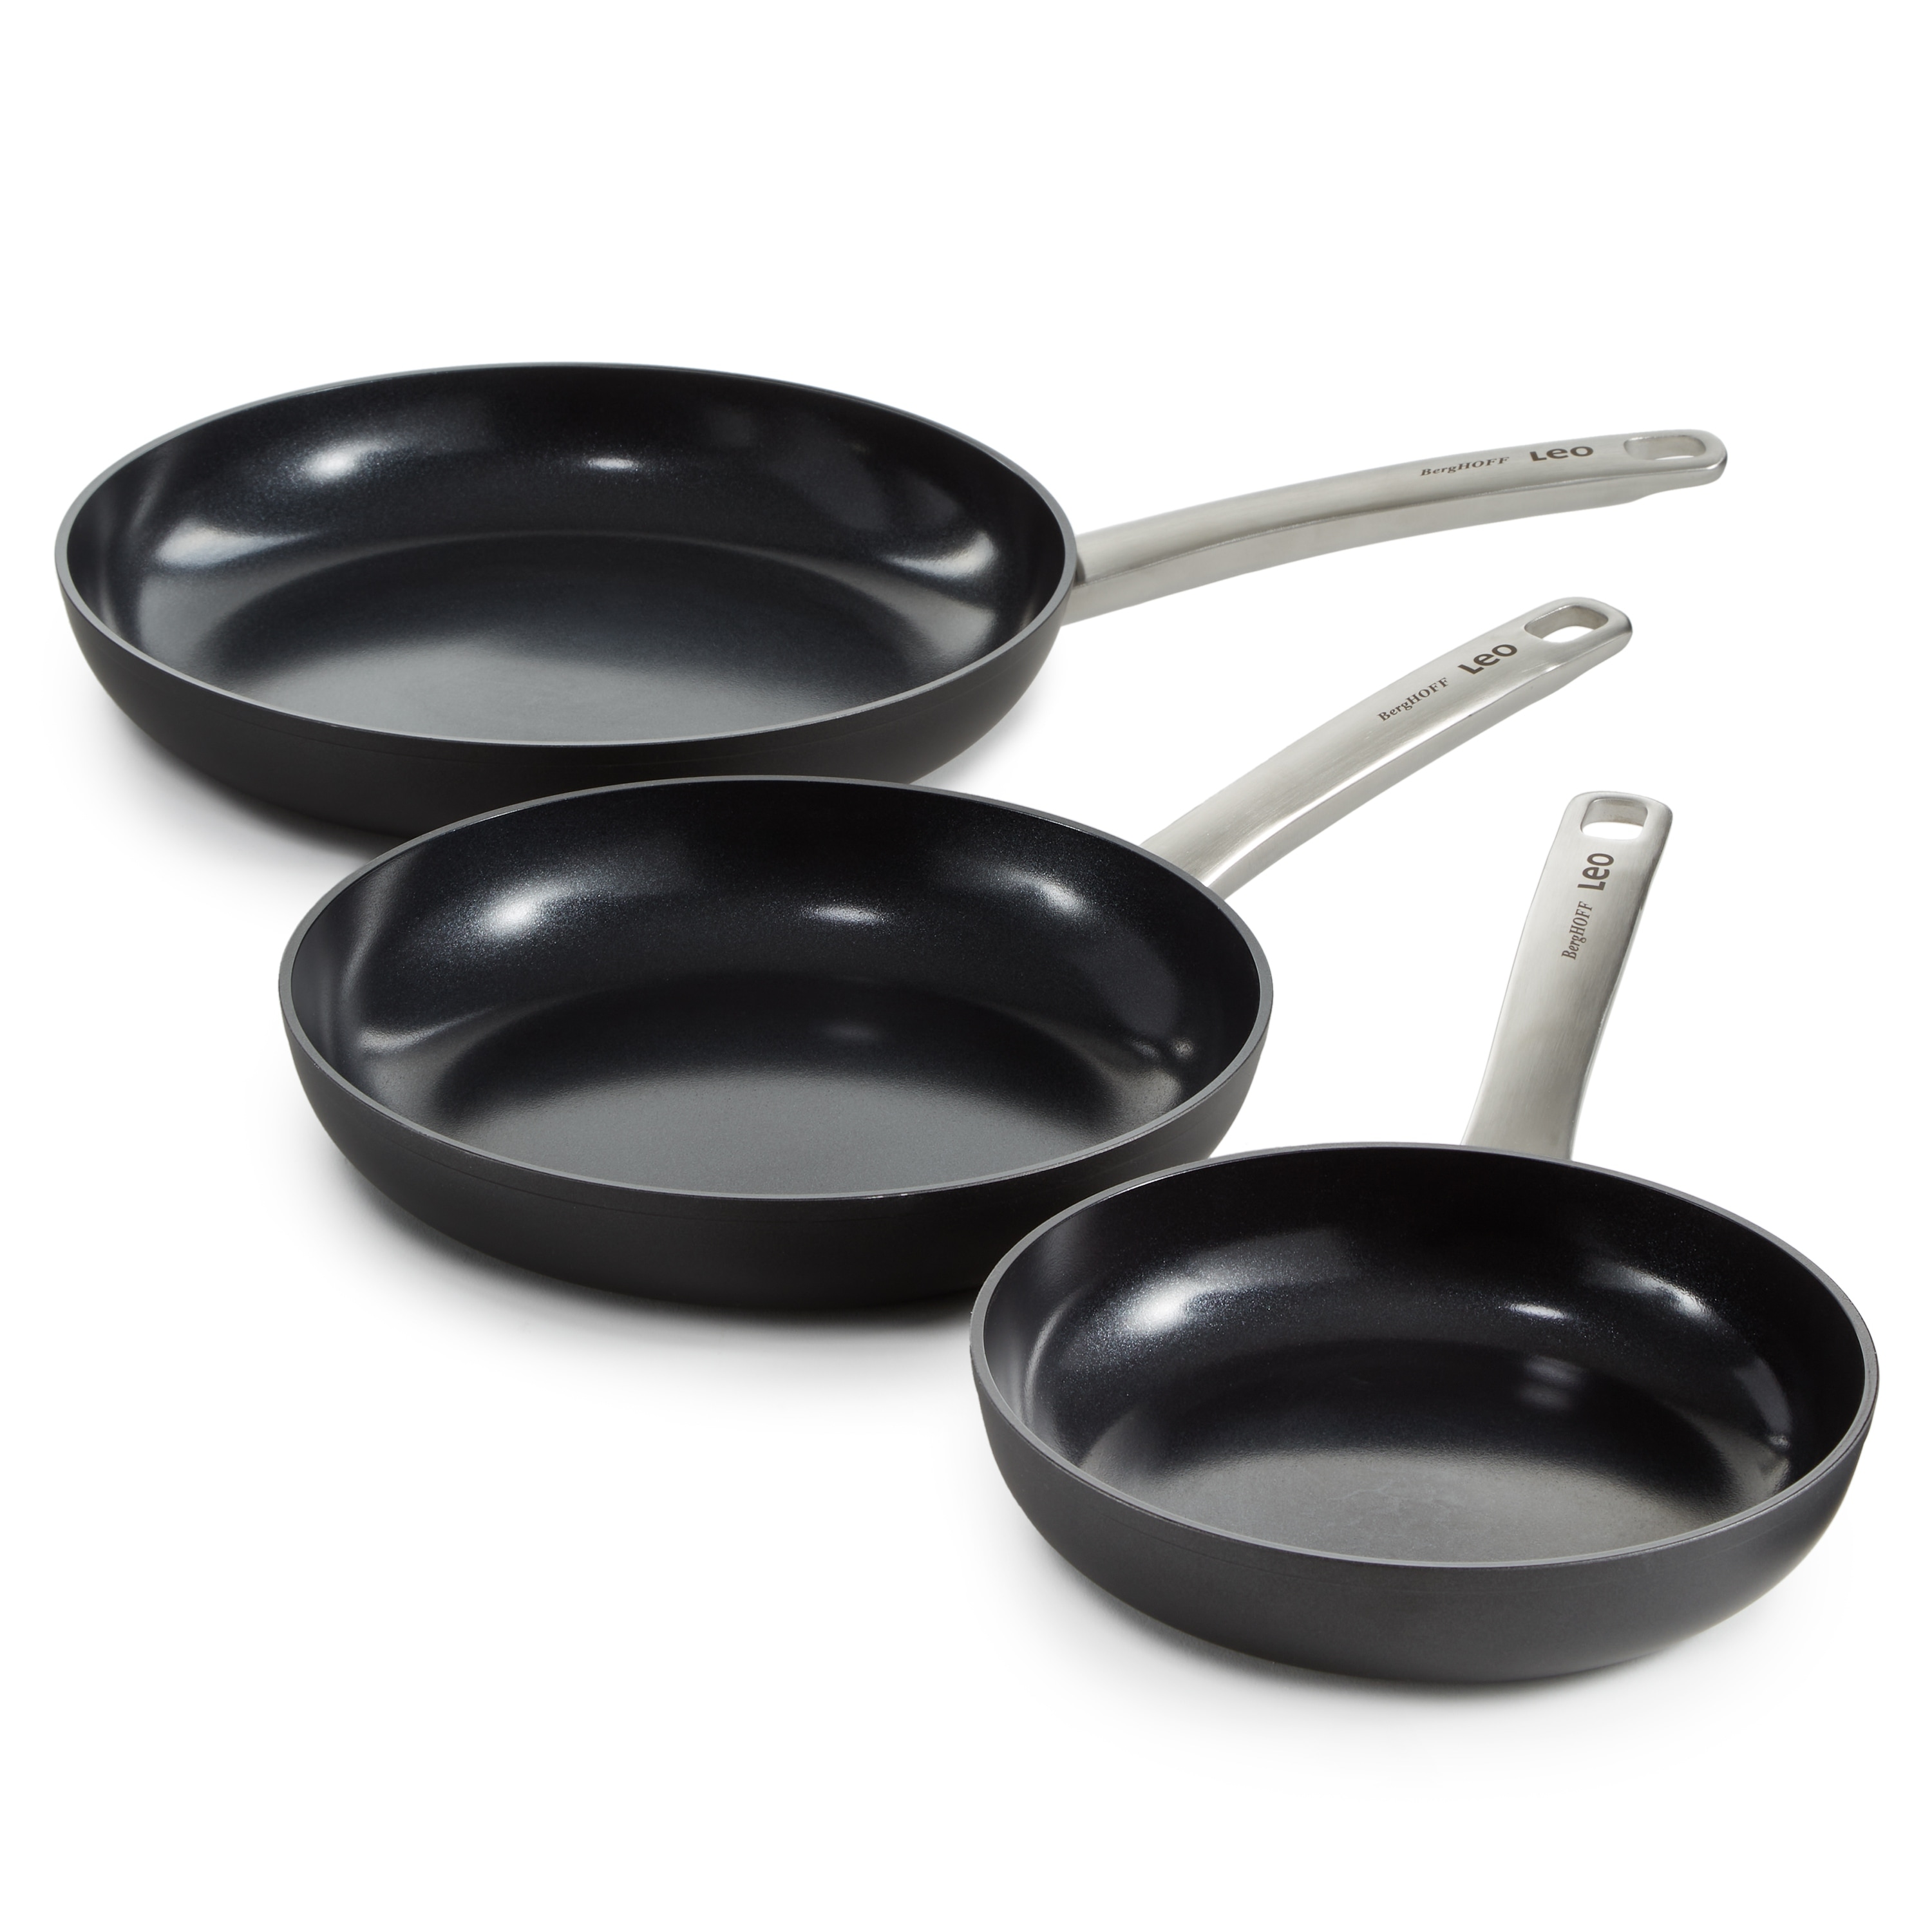 https://ak1.ostkcdn.com/images/products/is/images/direct/e96fe78b6ad394671df96e01e103bd88c33aa817/BergHOFF-Graphite-3Pc-Non-stick-Ceramic-Frying-Pan-Set%2C-Recycled-Aluminum%2C-Full-Disk-Bottom.jpg